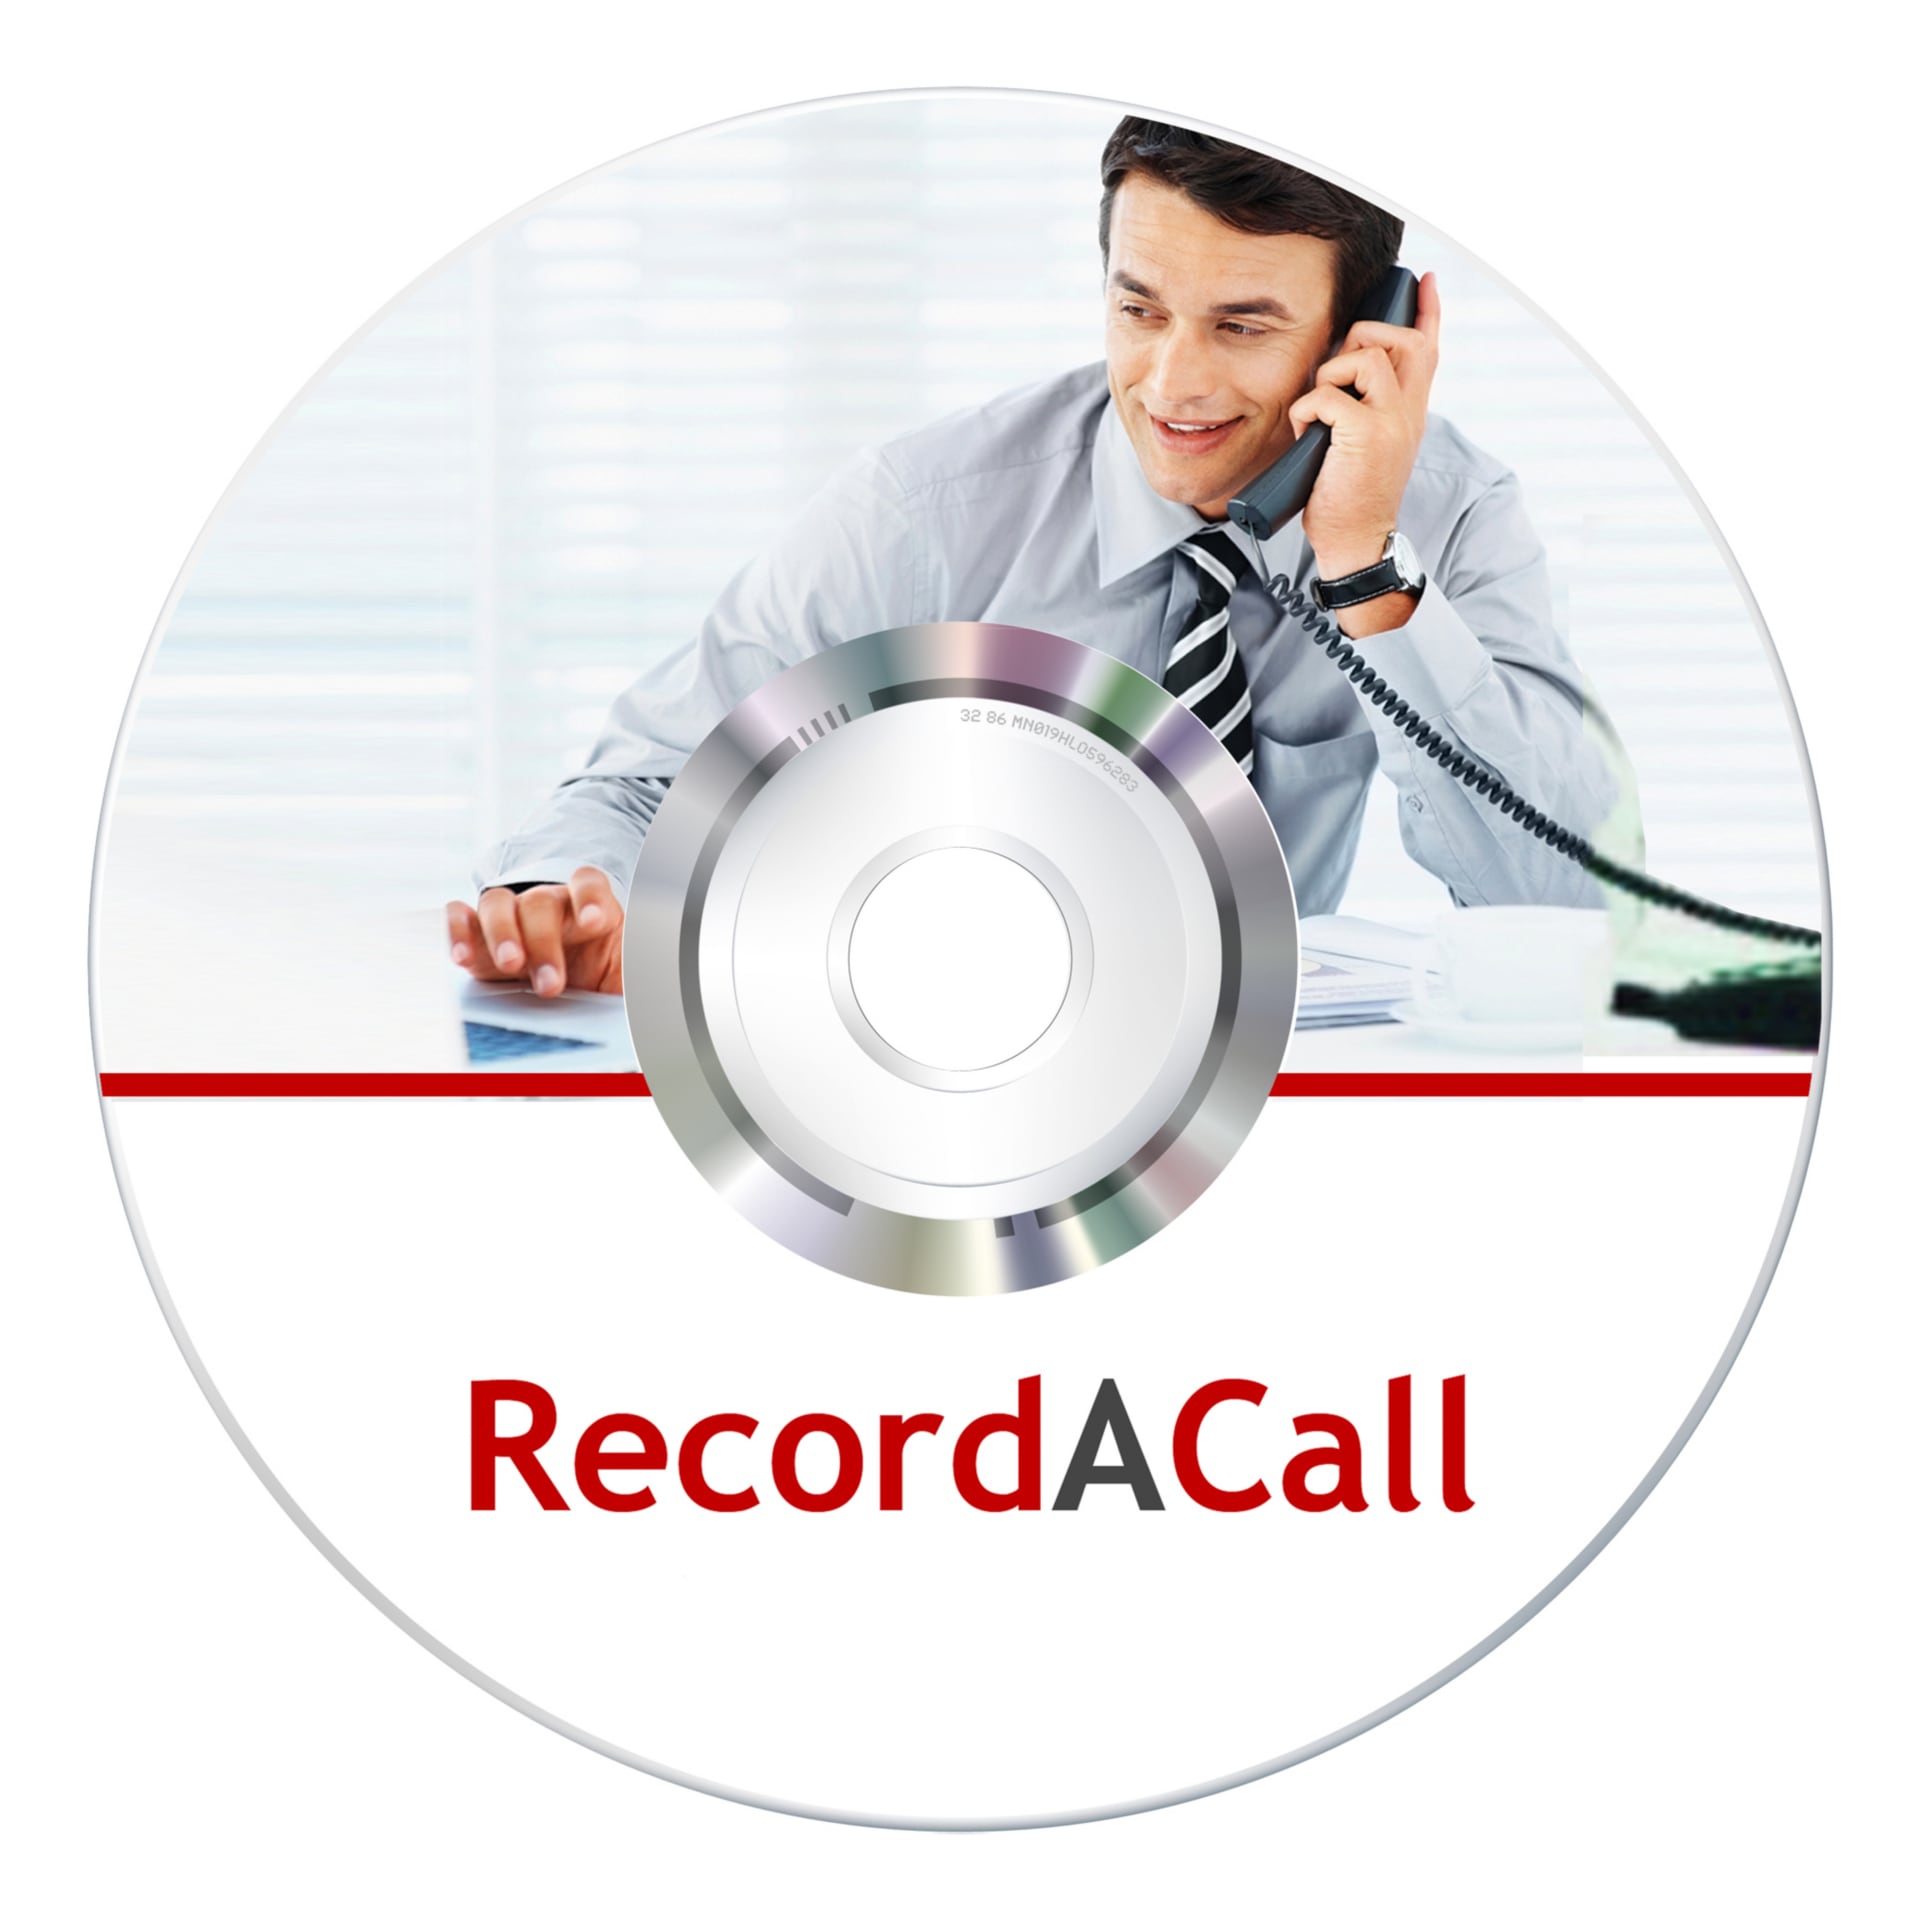 VEC Telephone record software designed for Windows PC's